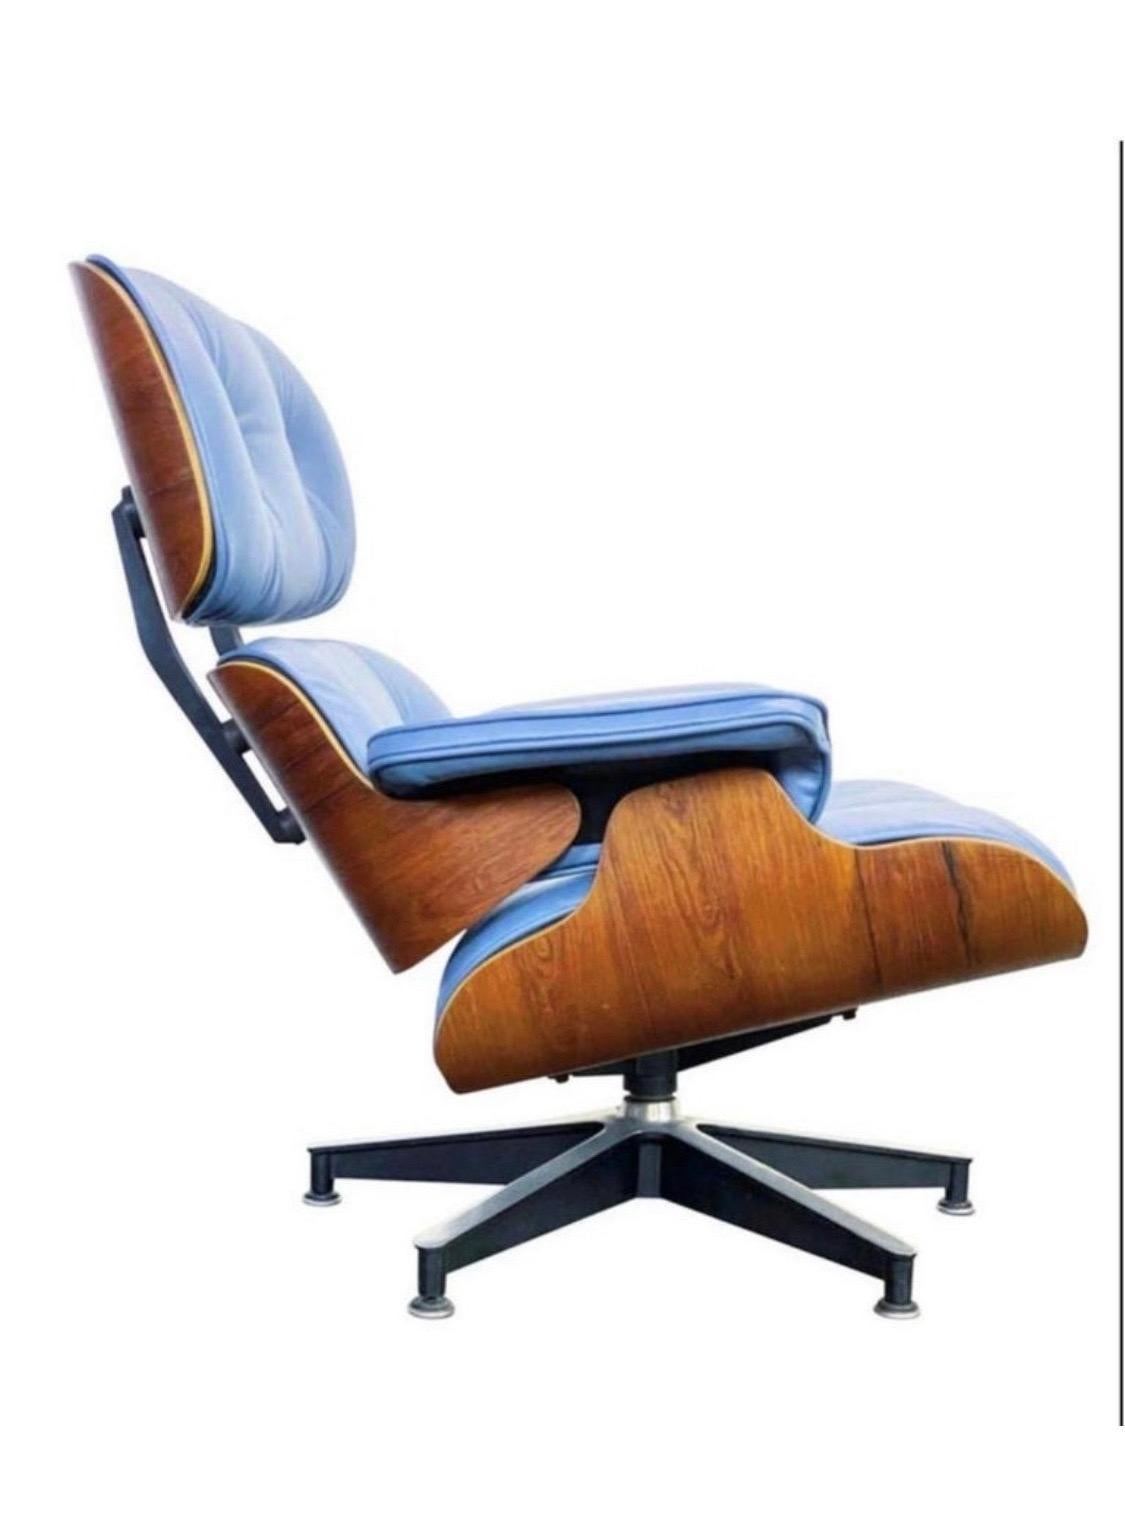 Restored Herman Miller Eames Lounge Chair with Custom Blue Leather For Sale 2